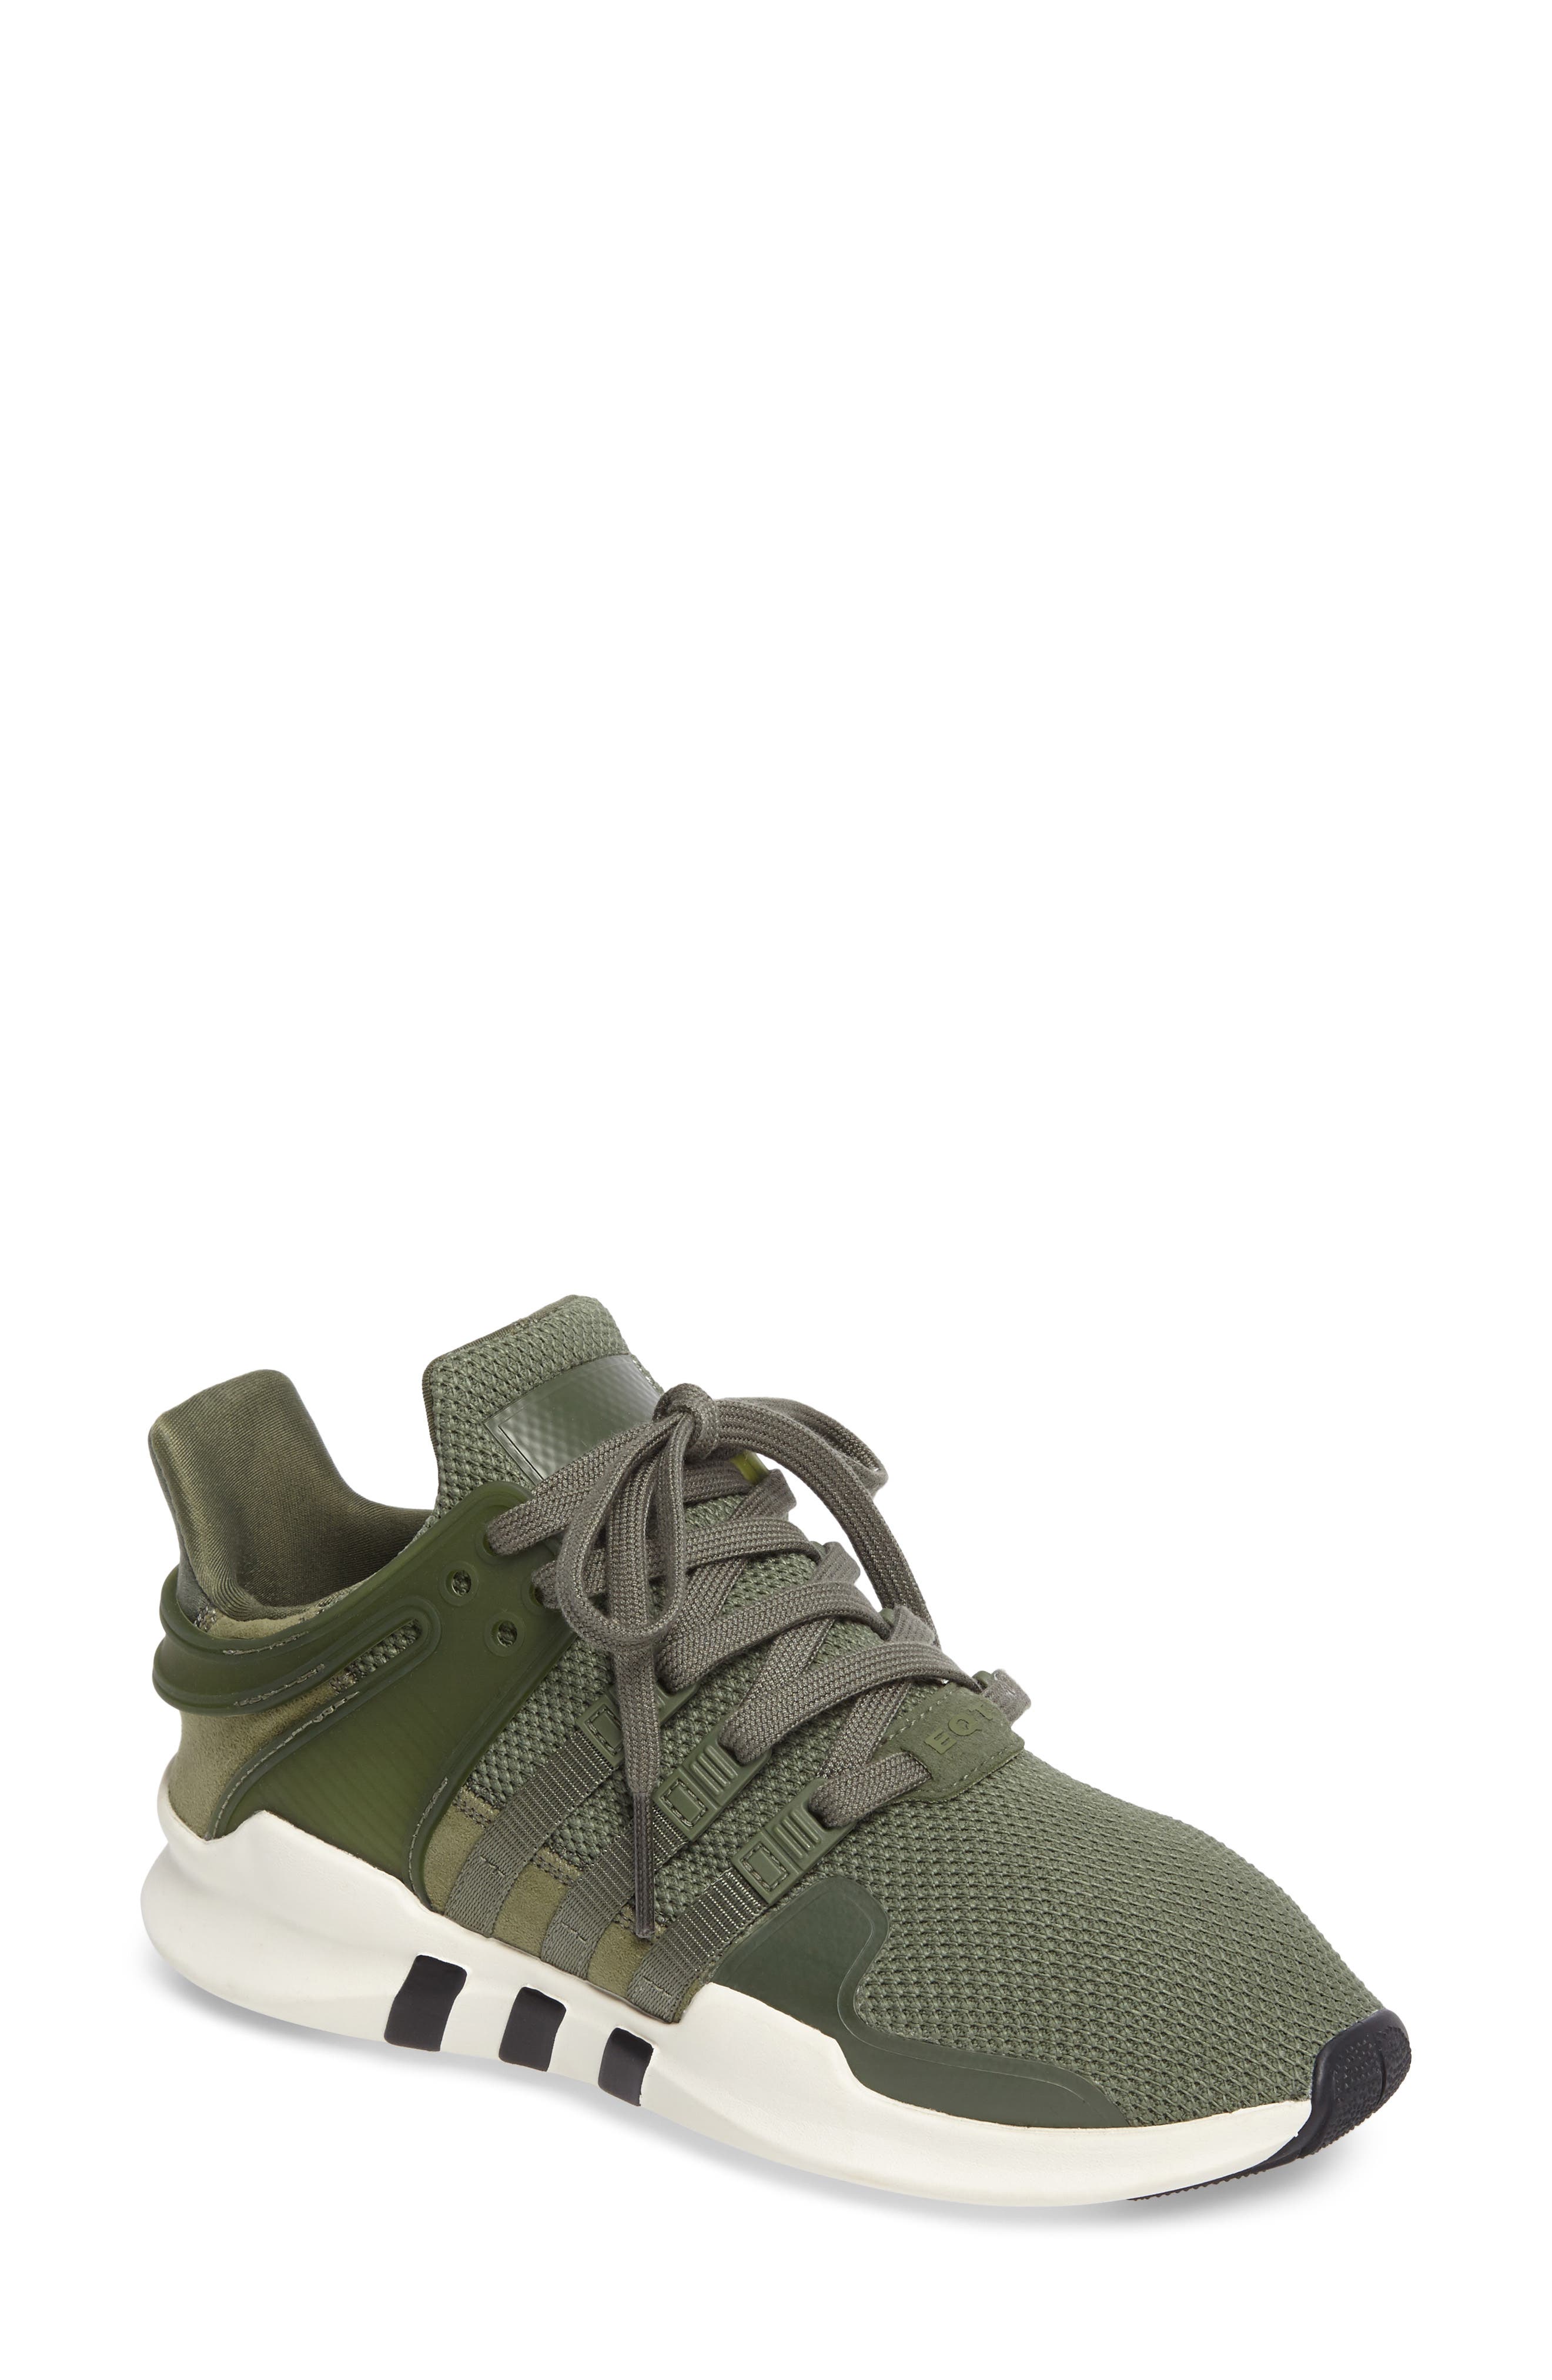 adidas eqt support racing adv sneaker